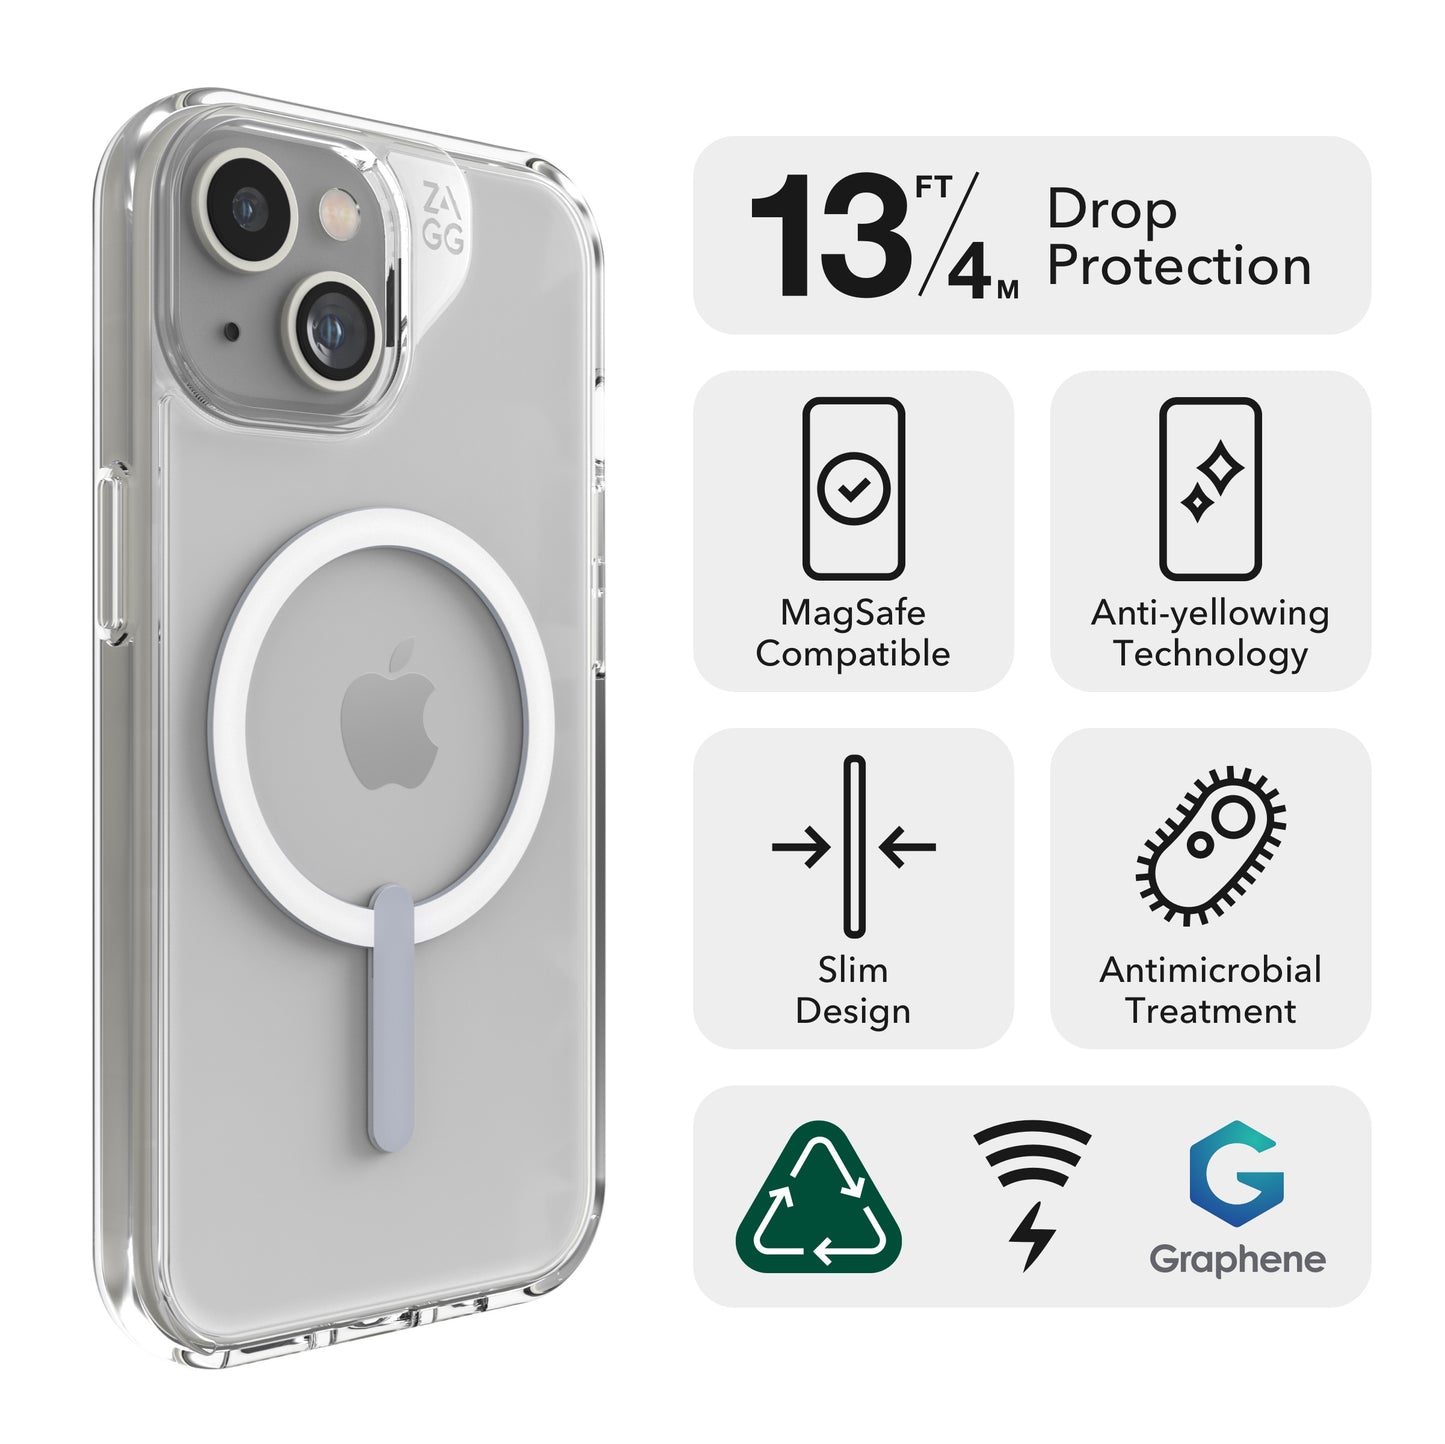 ZAGG Crystal Palace Protective Case for Apple iPhone 15/iPhone 14/iPhone 13, MagSafe, 13ft Drop, Wireless Charging, Graphene, Enhanced Grip, Clear